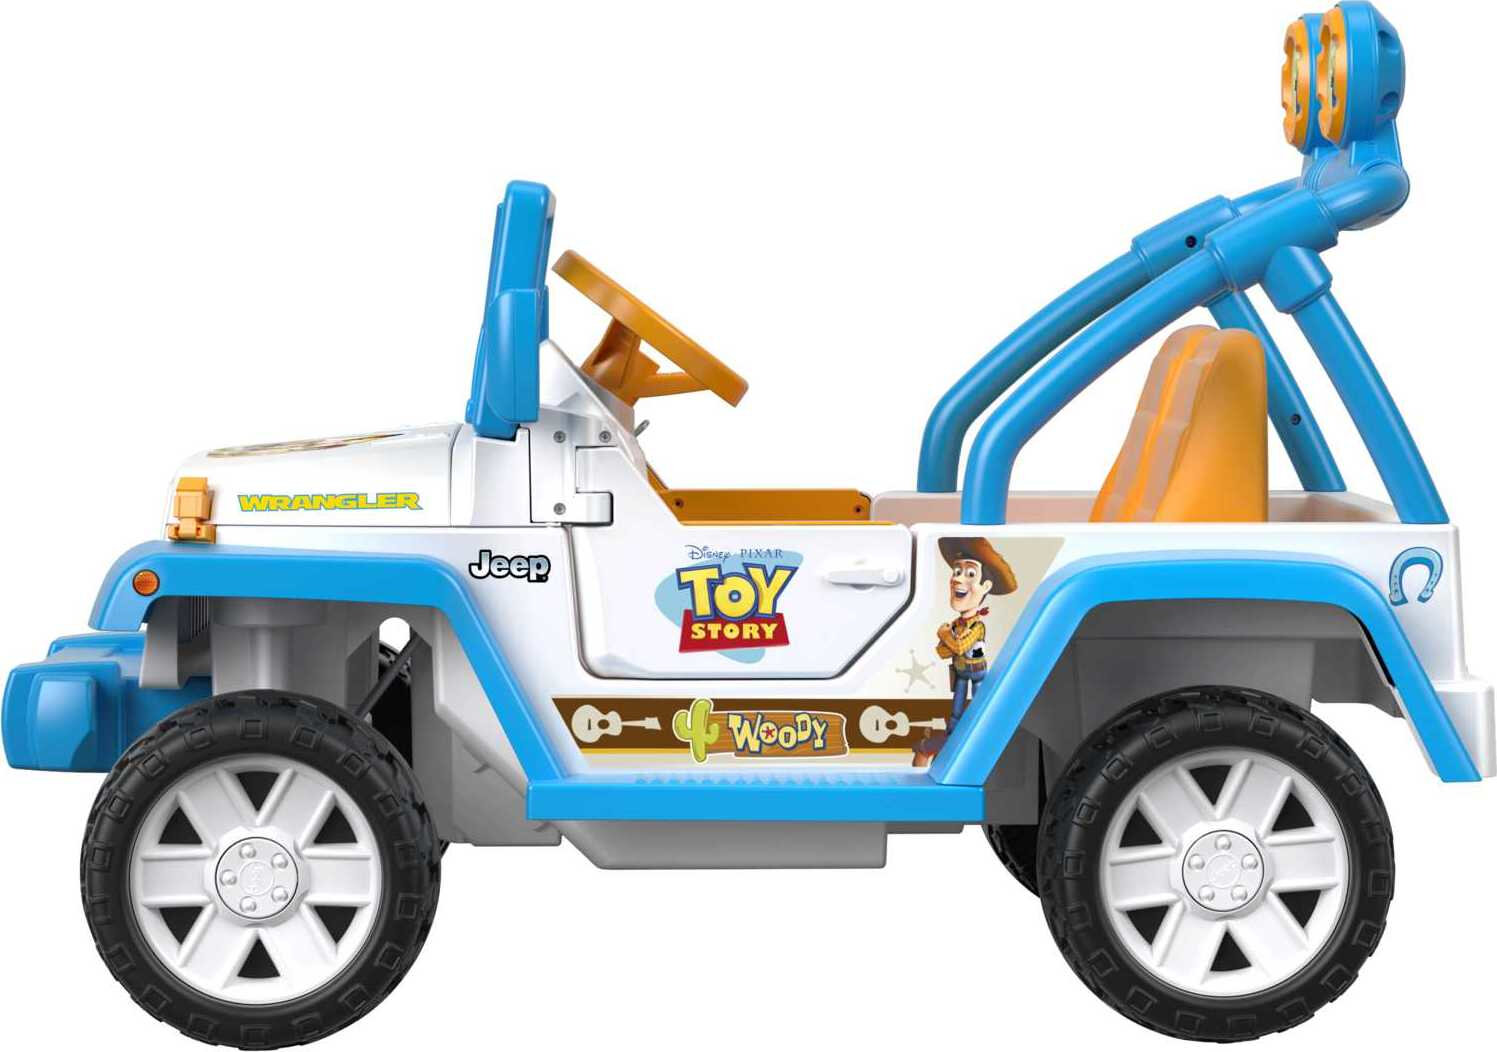 Power Wheels Disney Pixar Toy Story Jeep Wrangler Battery Powered Ride-On Vehicle with Sounds, 12V - image 5 of 8